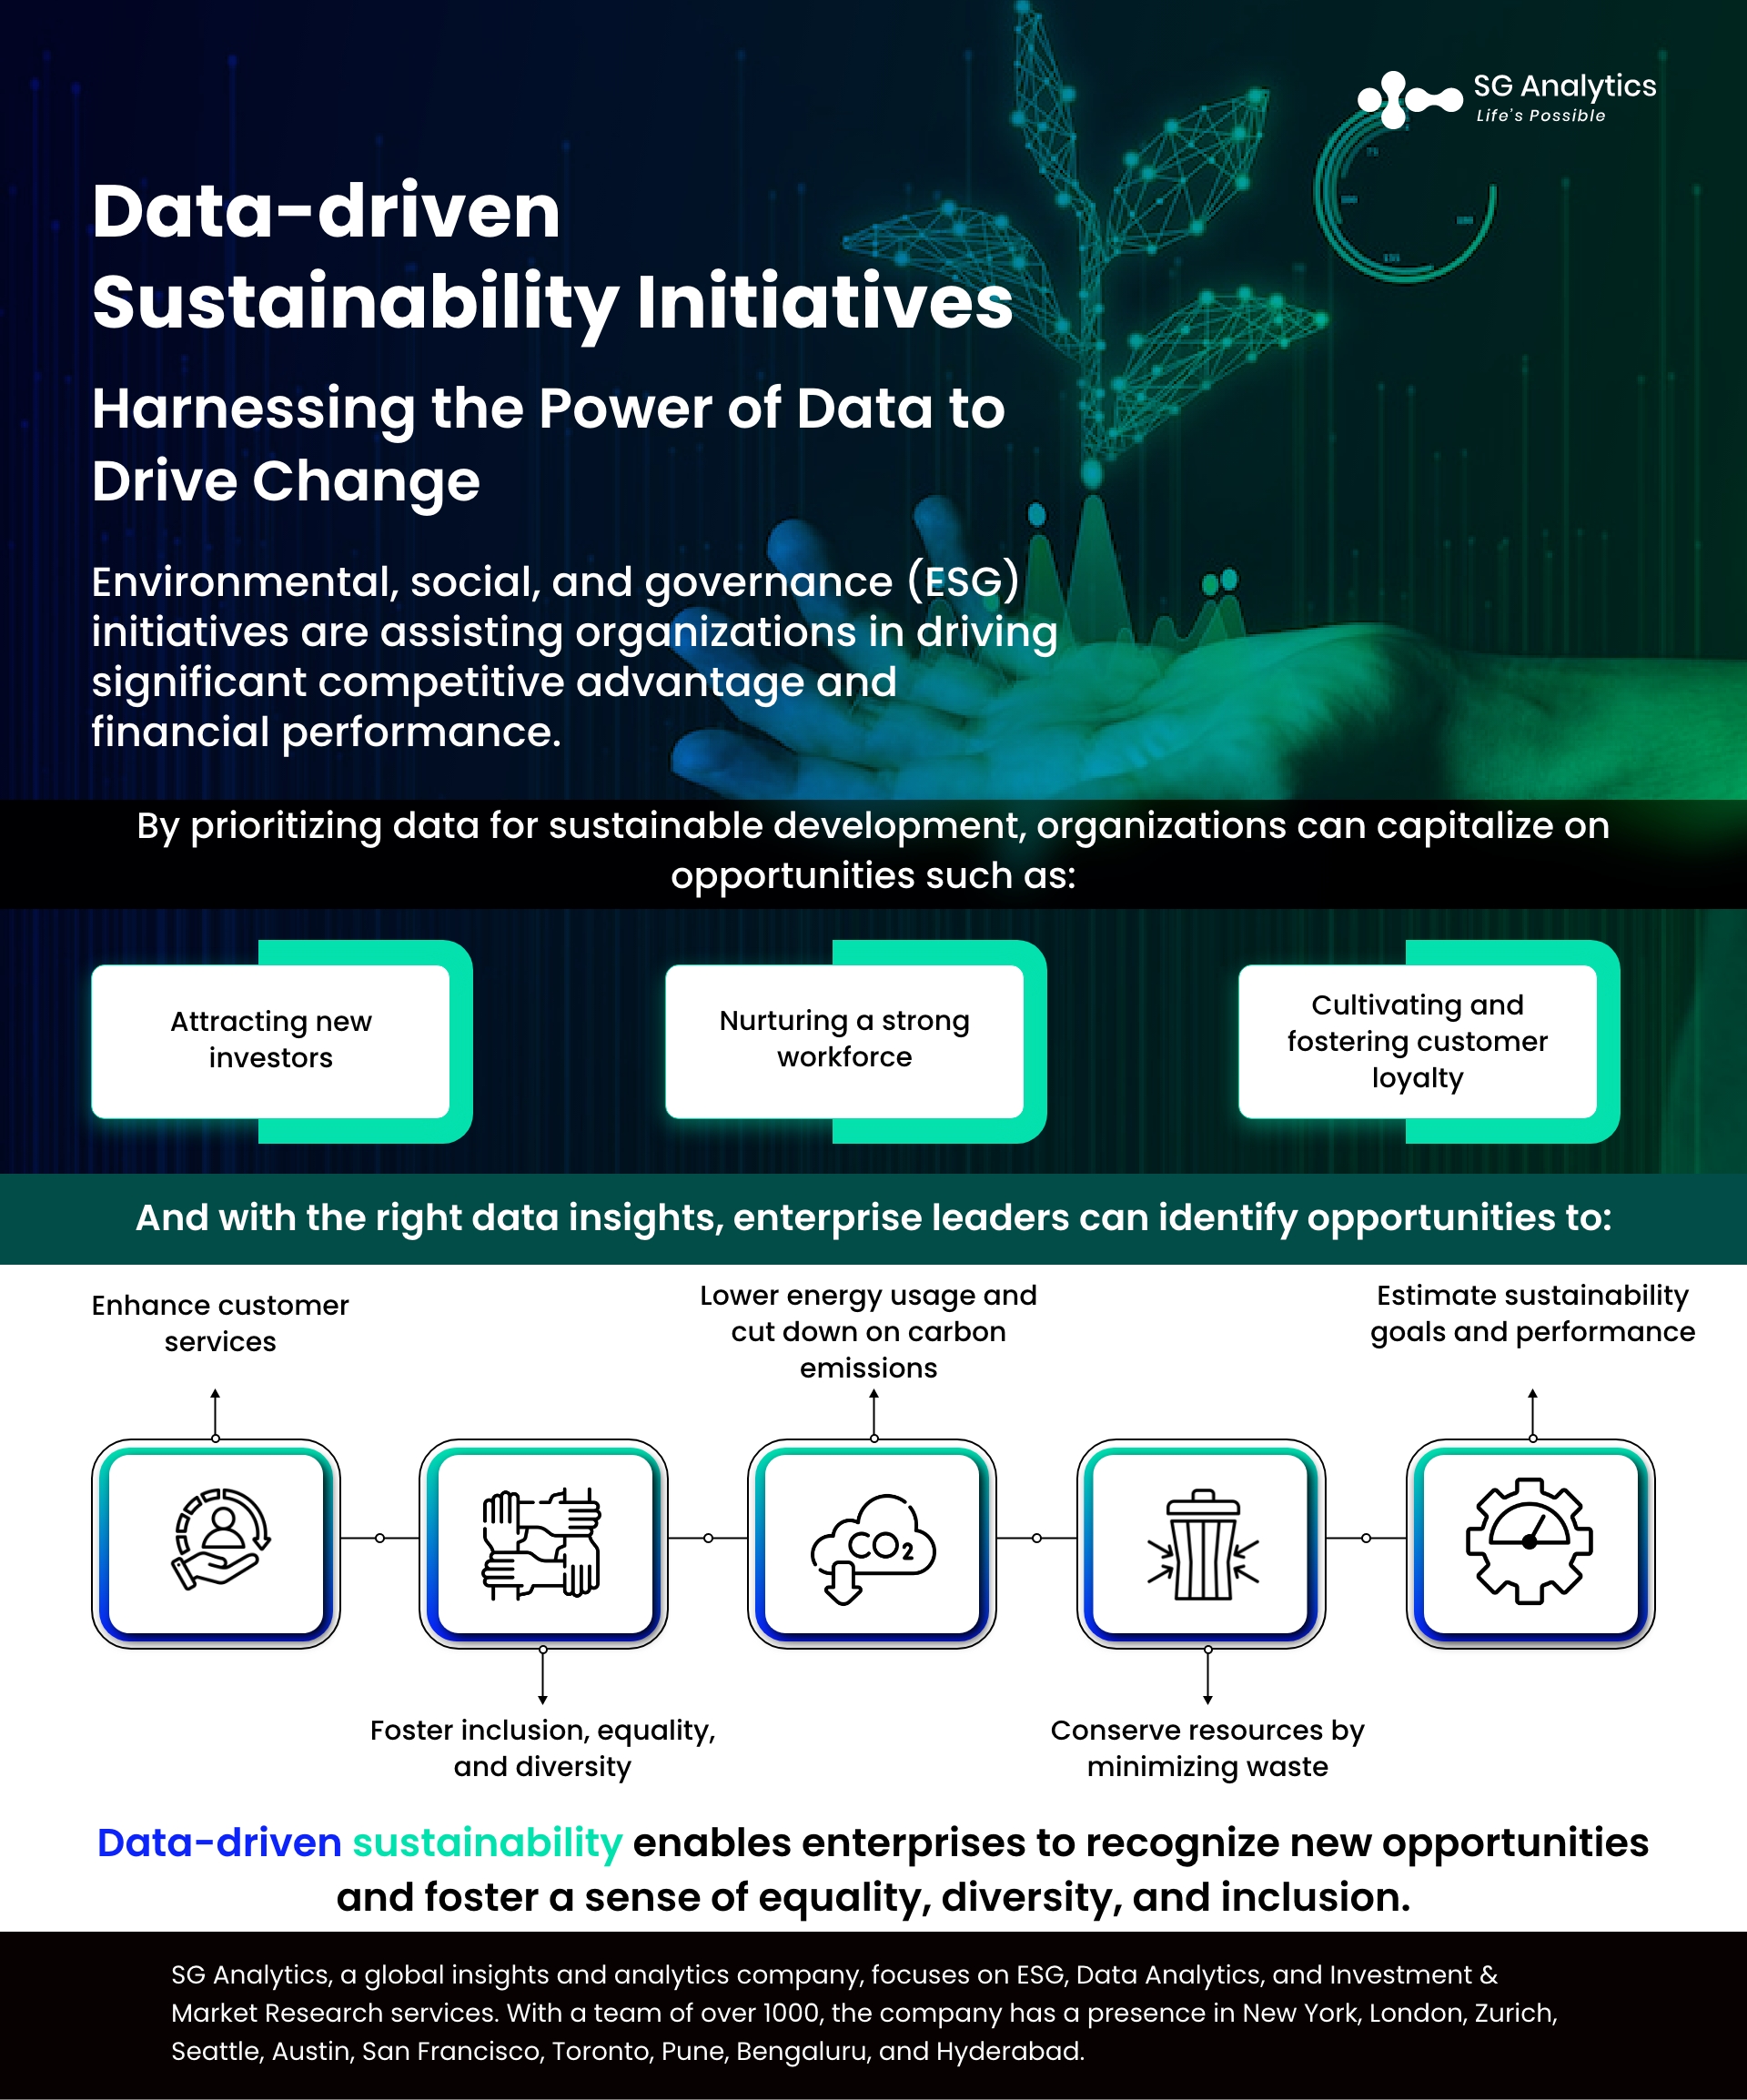 Harnessing the Power of Data to Drive Change